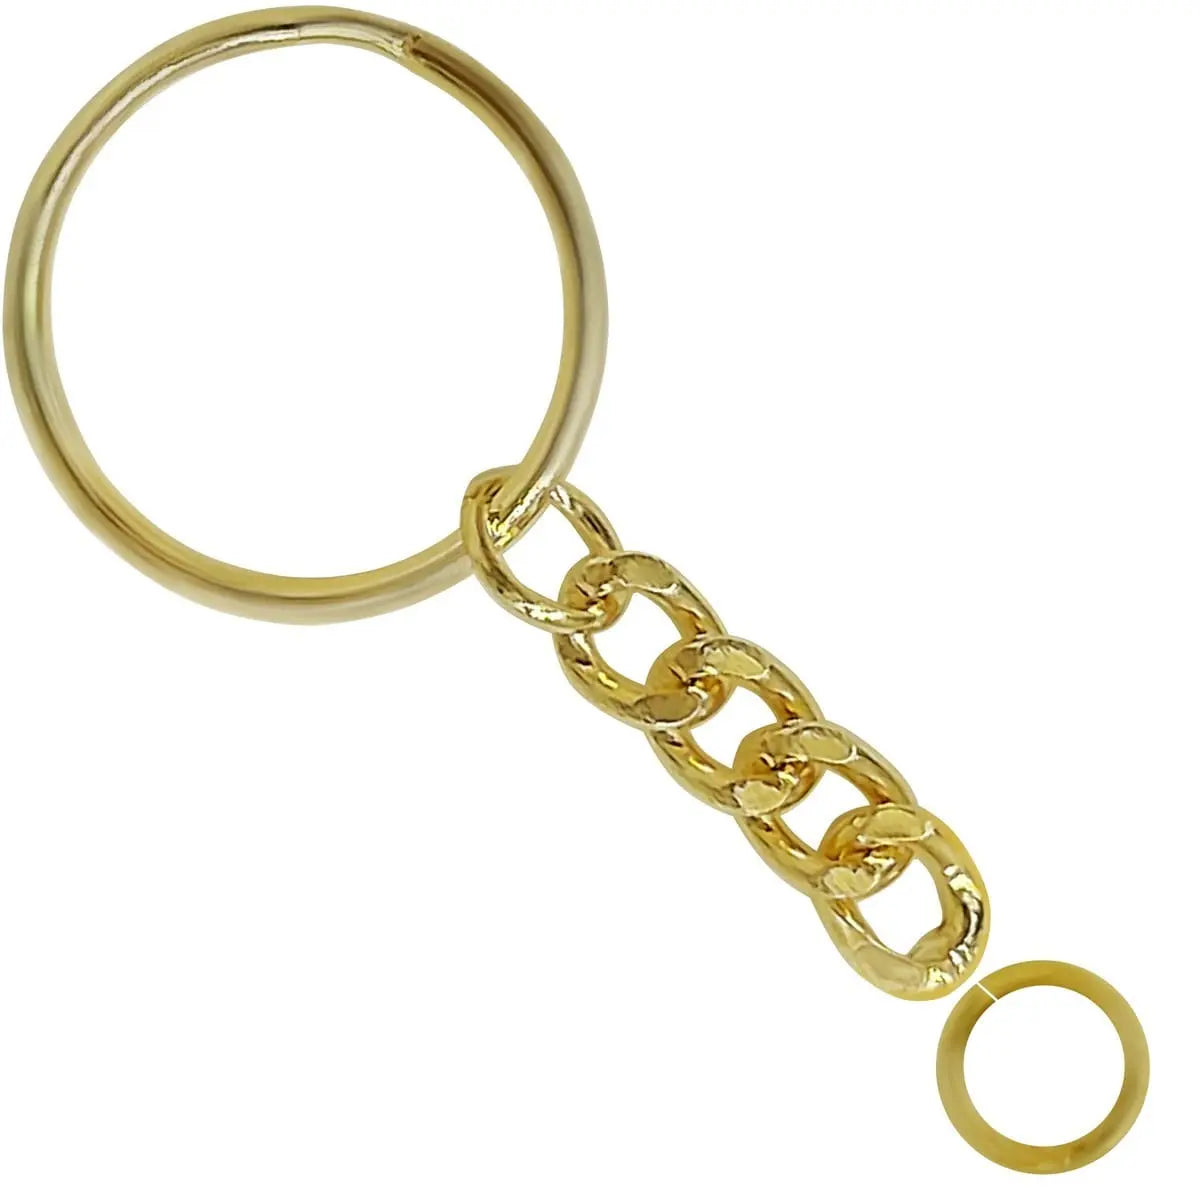 Canvazo Metal Keychain Rings with Chain Pack of 12 Canvazo